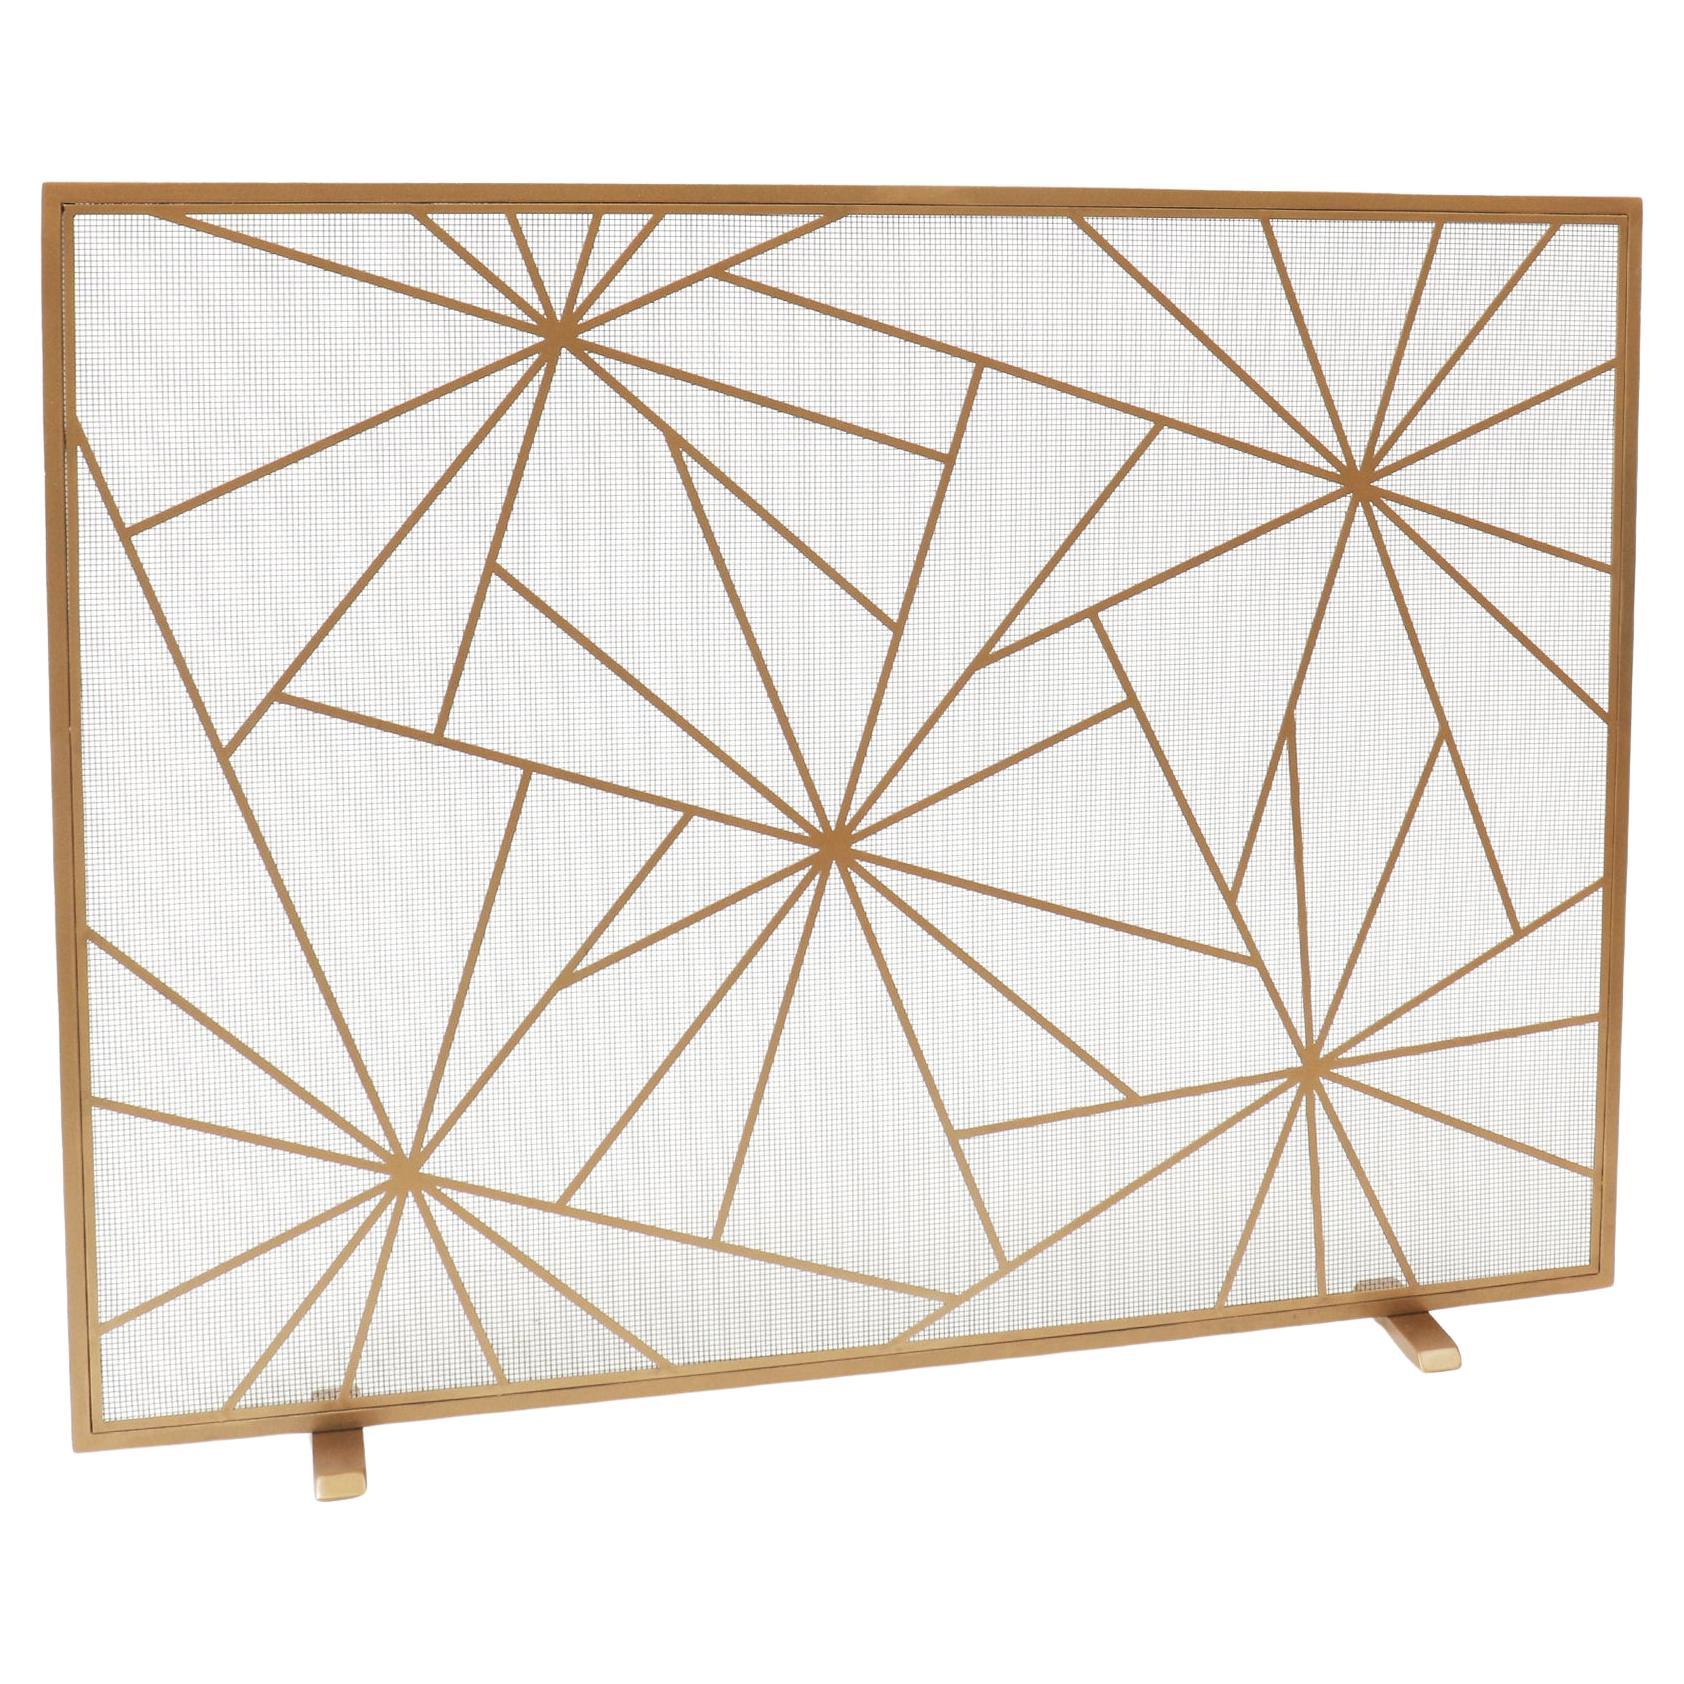 Shattered Starburst Fire Screen in a Gold Finish